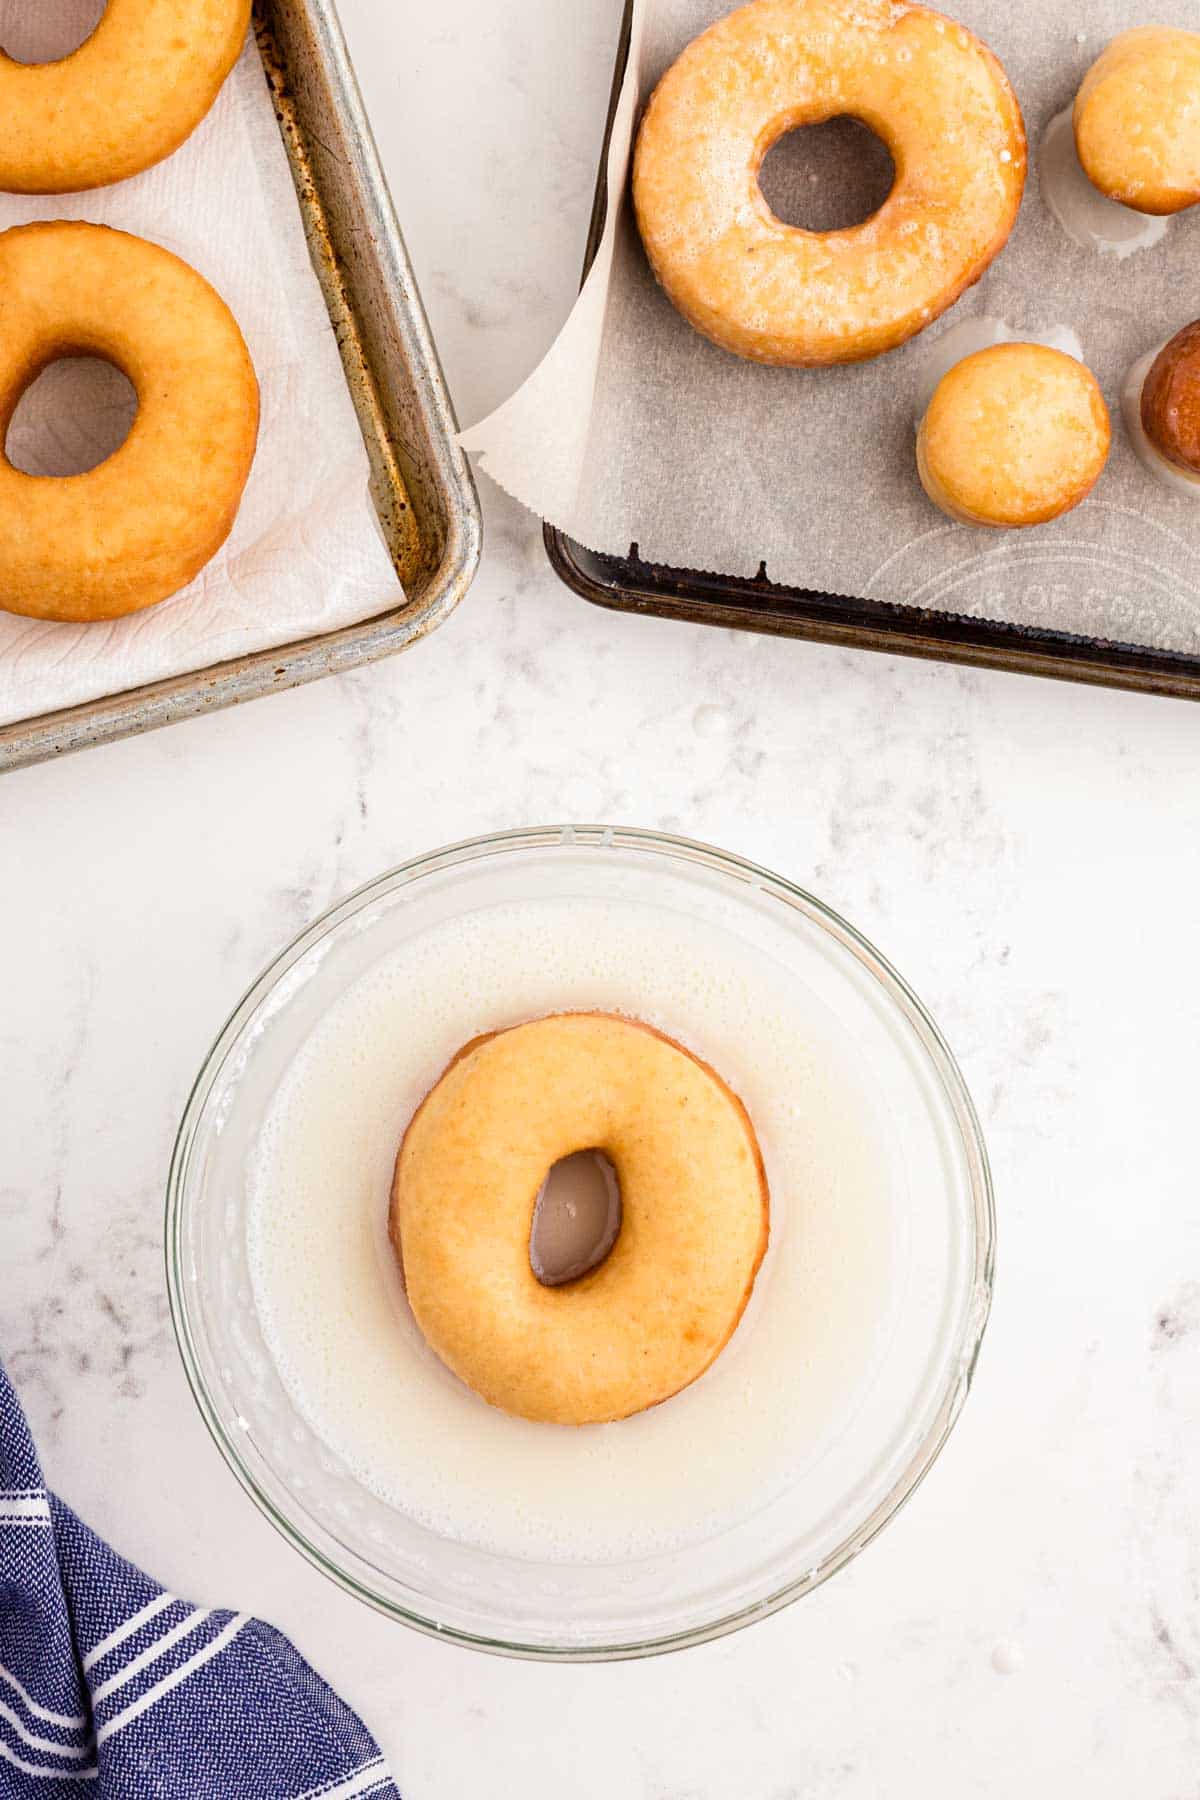 Sourdough donuts being dipped in glaze.